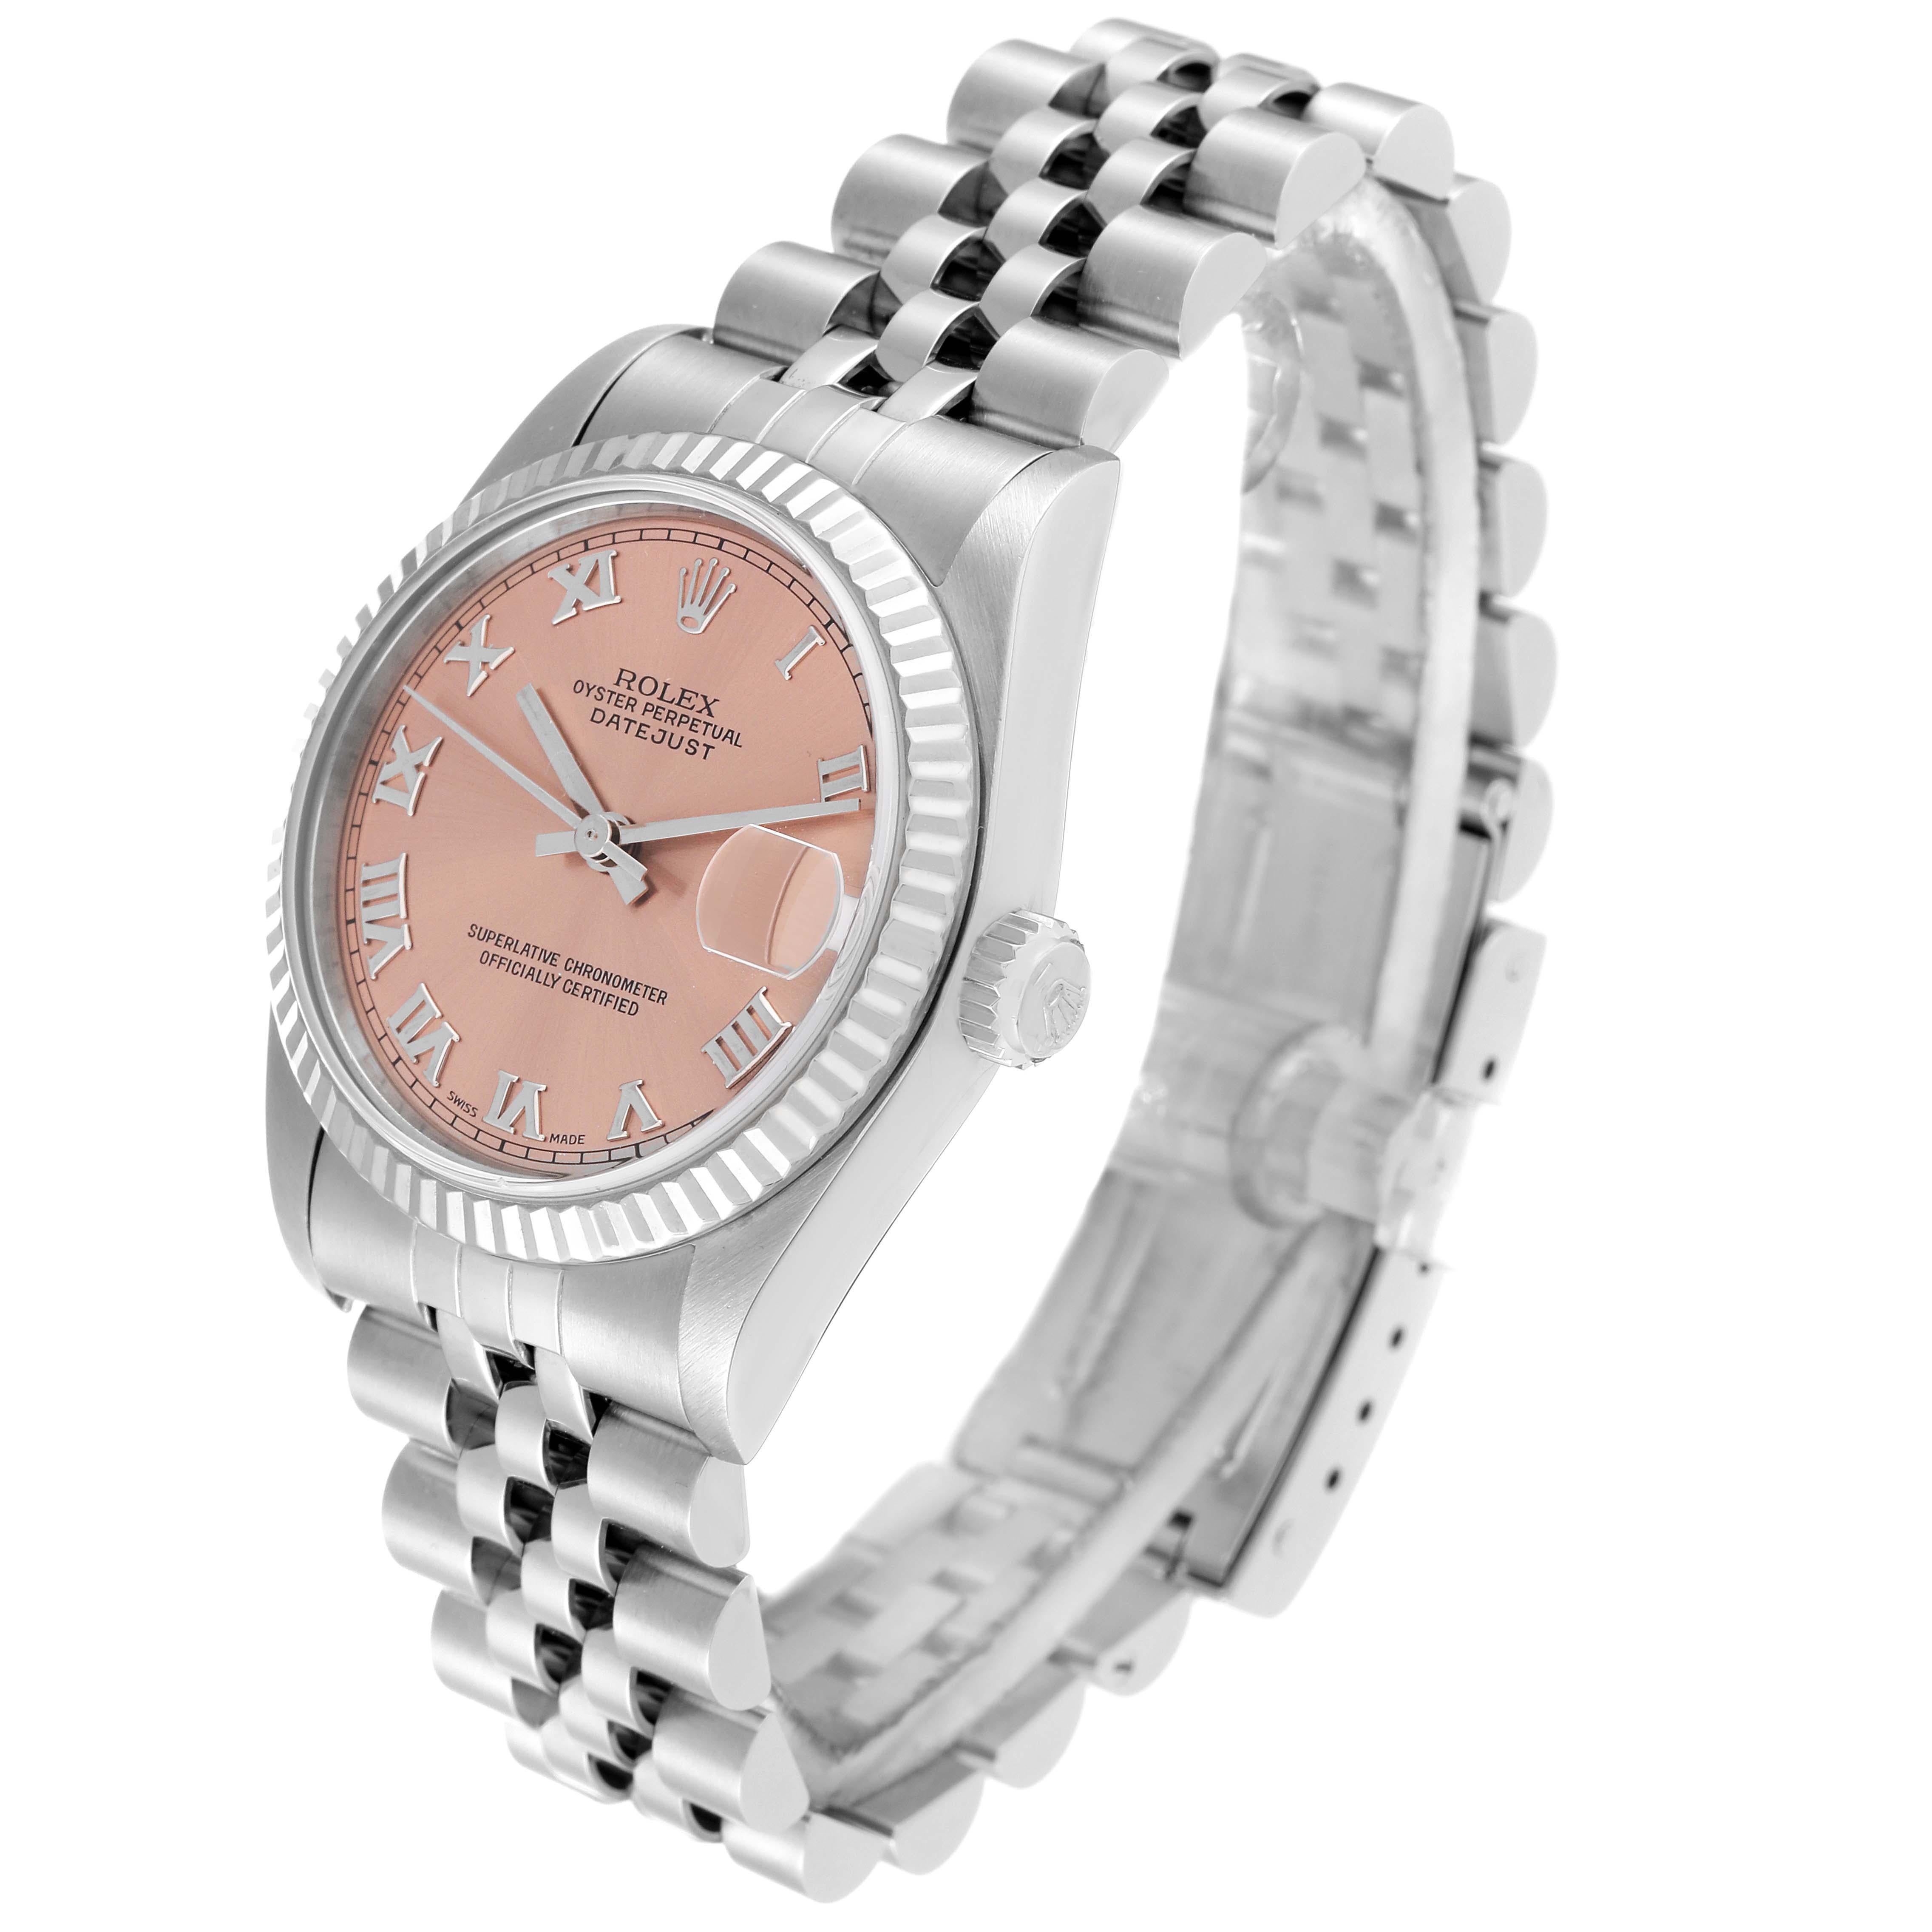 Rolex Datejust Midsize Steel White Gold Salmon Dial Ladies Watch 68274 In Good Condition For Sale In Atlanta, GA